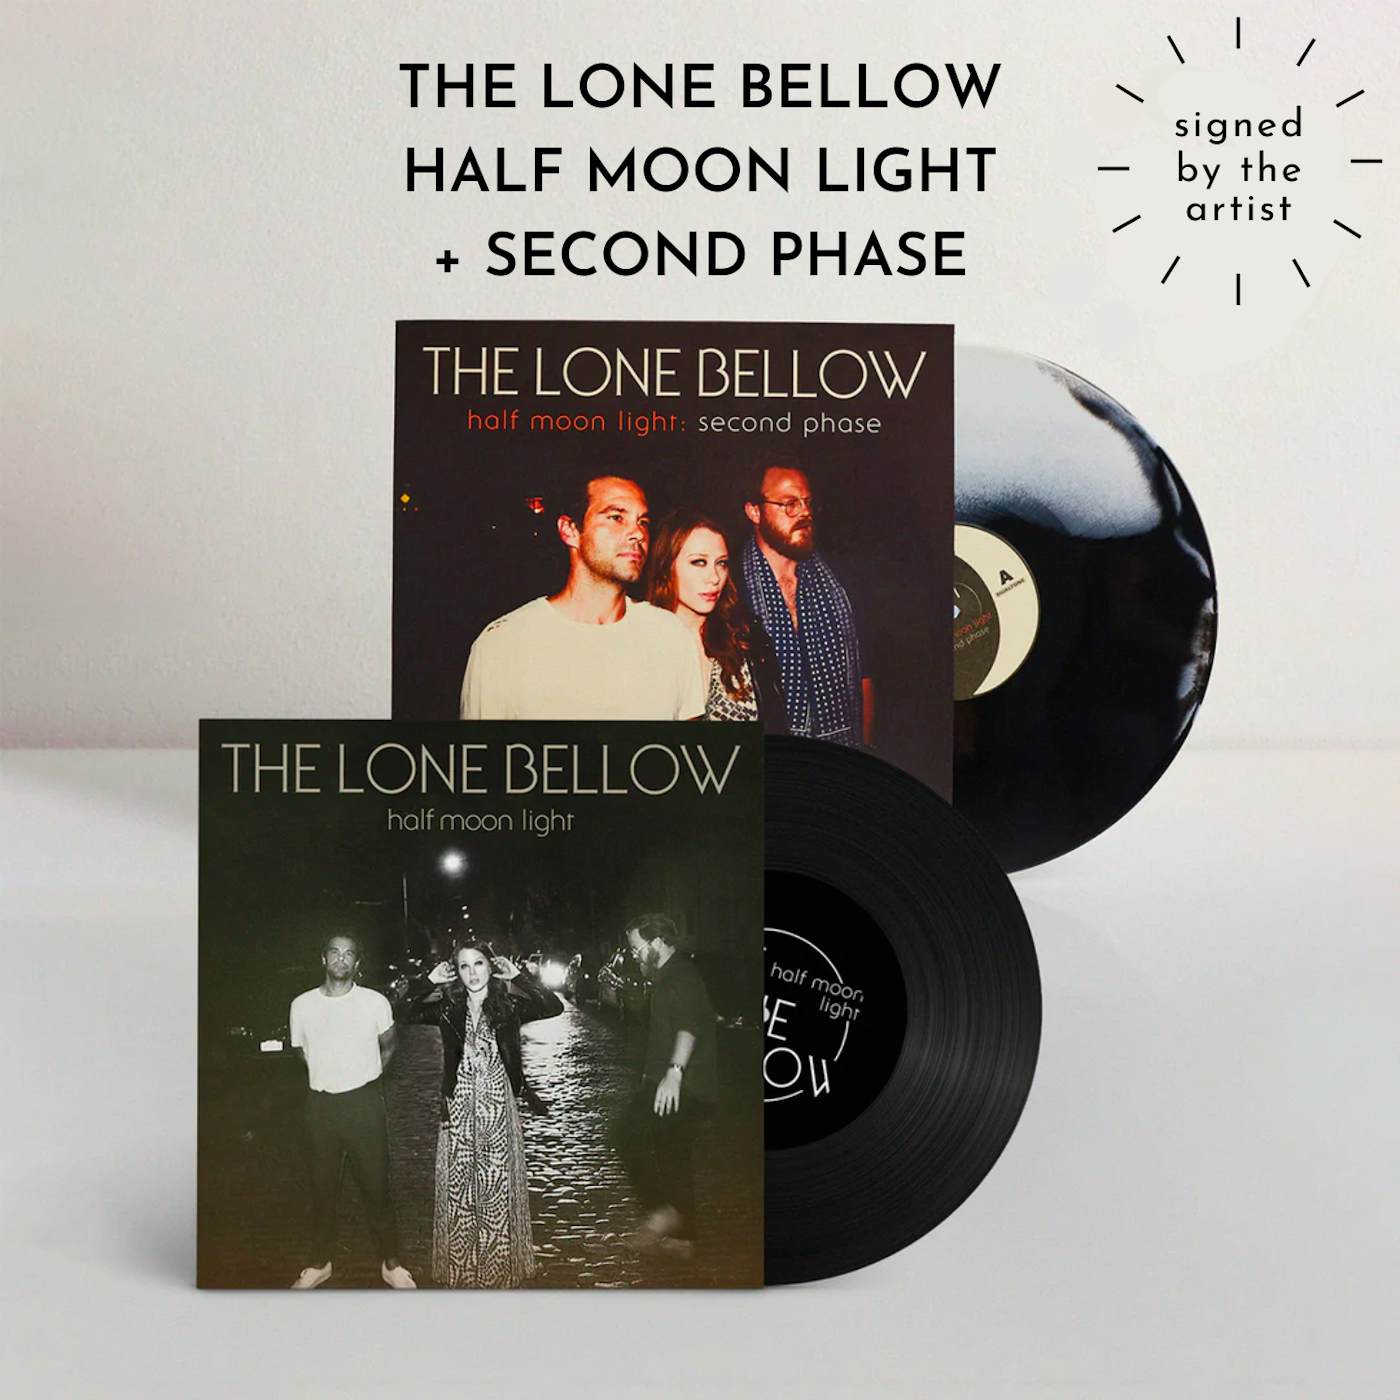 The Lone Bellow Half Moon Light + Second Phase (Signed LP) (Vinyl)